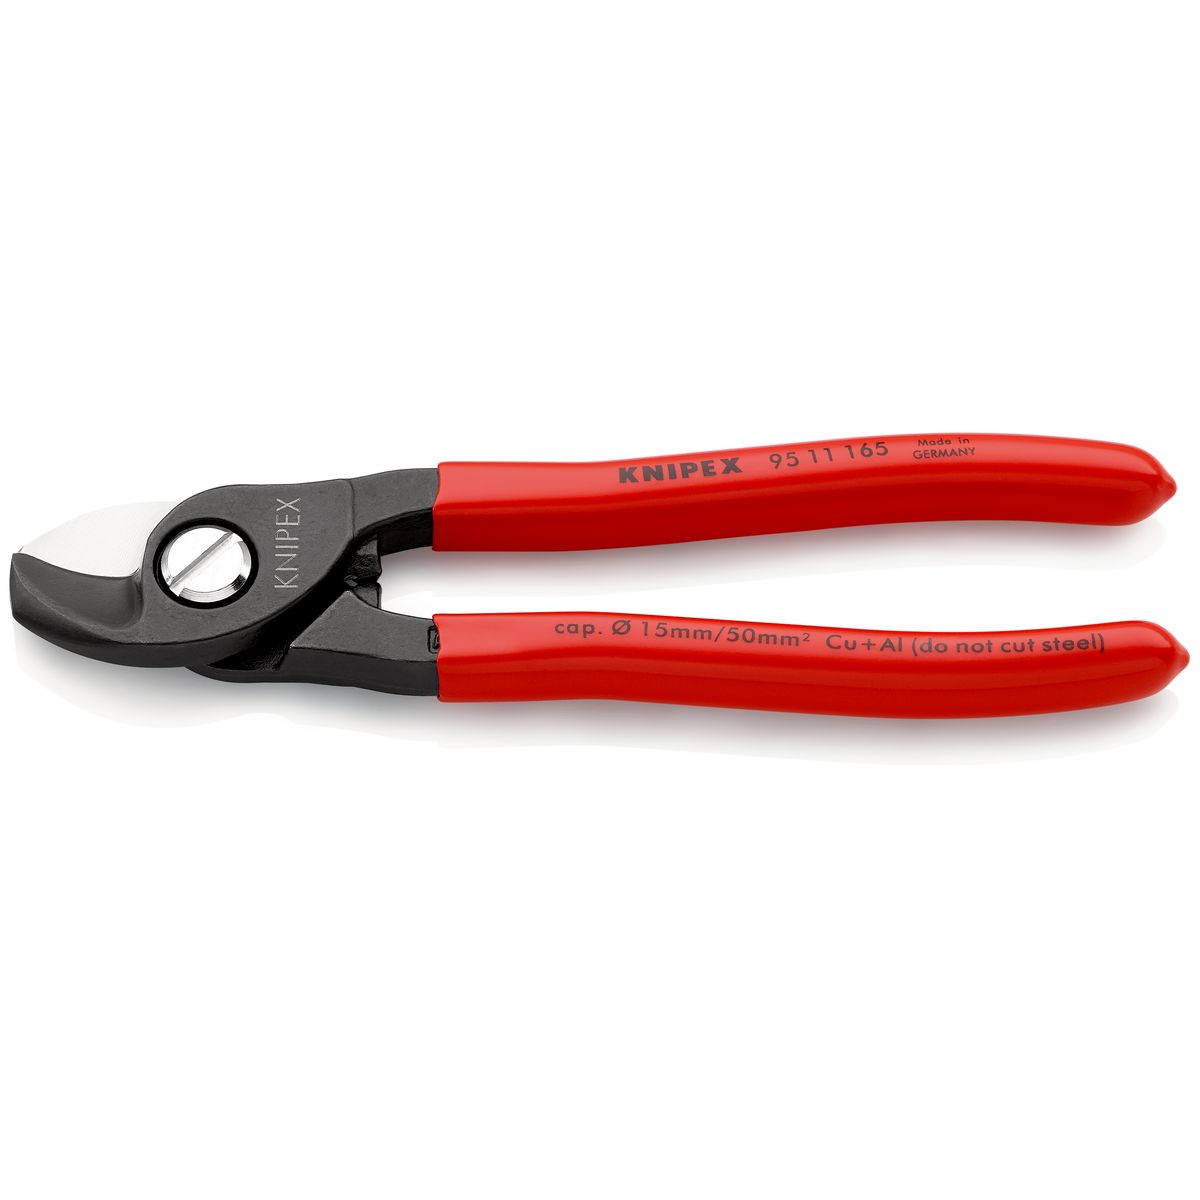 CABLE SHEARS 9511 165mm Knipex